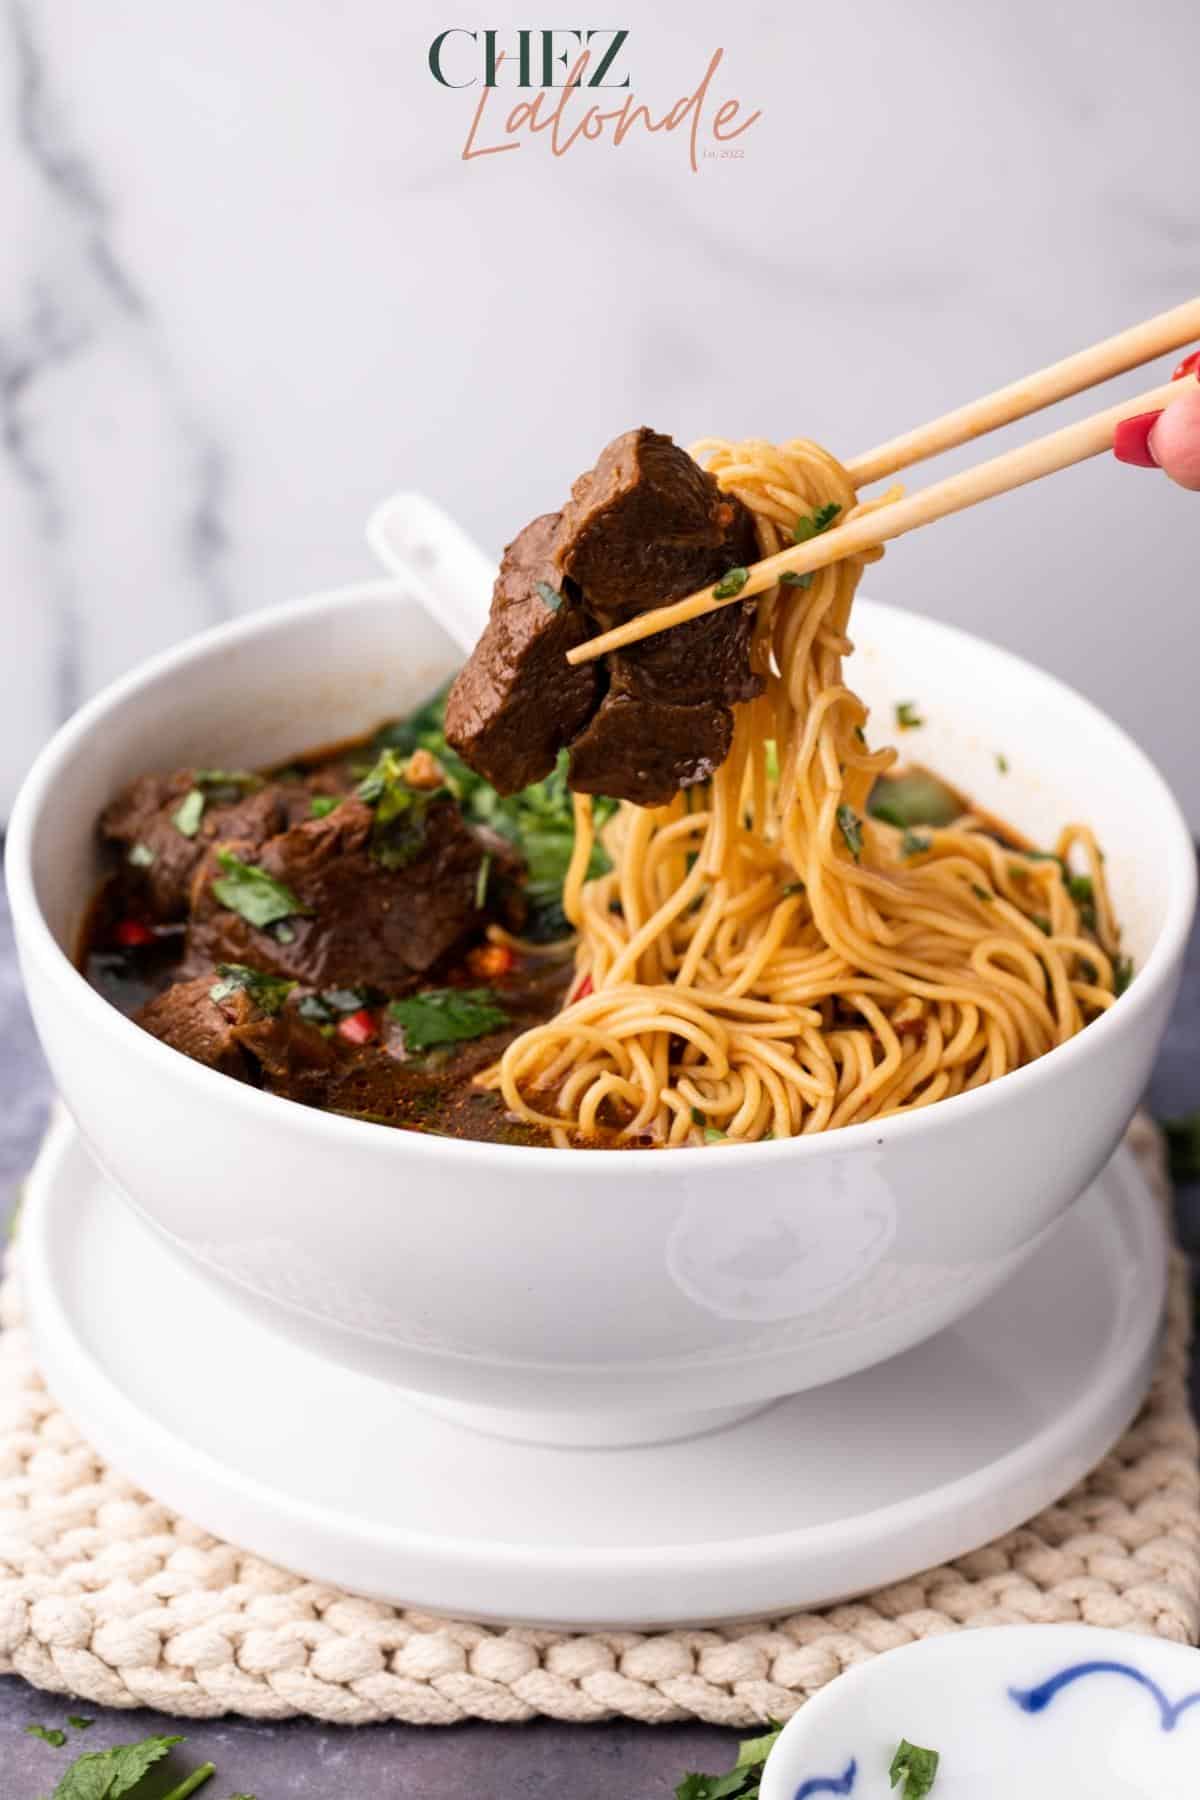 Taiwanese spicy beef noodle soup in a white bowl. A pair of chopsticks is picking up a piece of tender beef shank and some wheat noodles. The bowl seats on top of a round saucer.